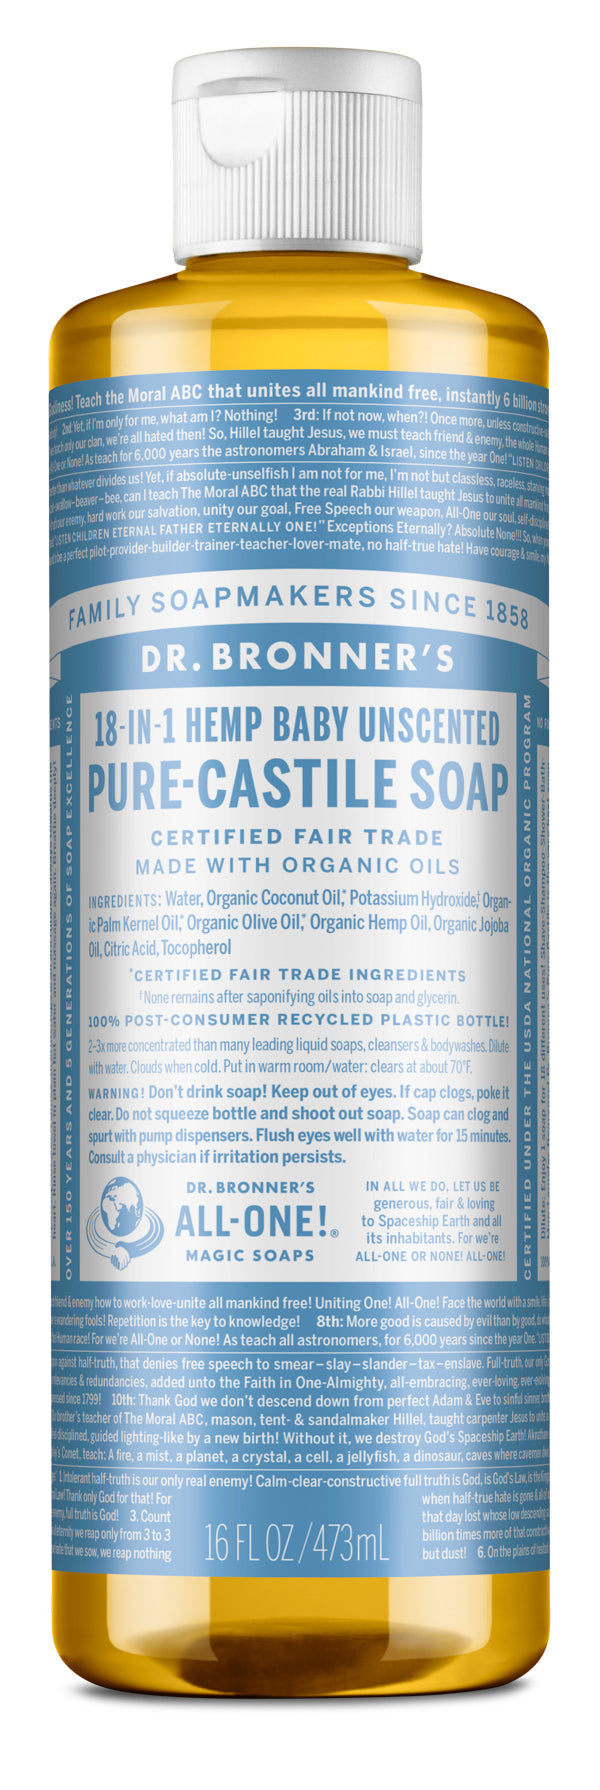 Baby Unscented - Pure-Castile Liquid Soap - 16 oz - ProCare Outlet by Dr Bronner's